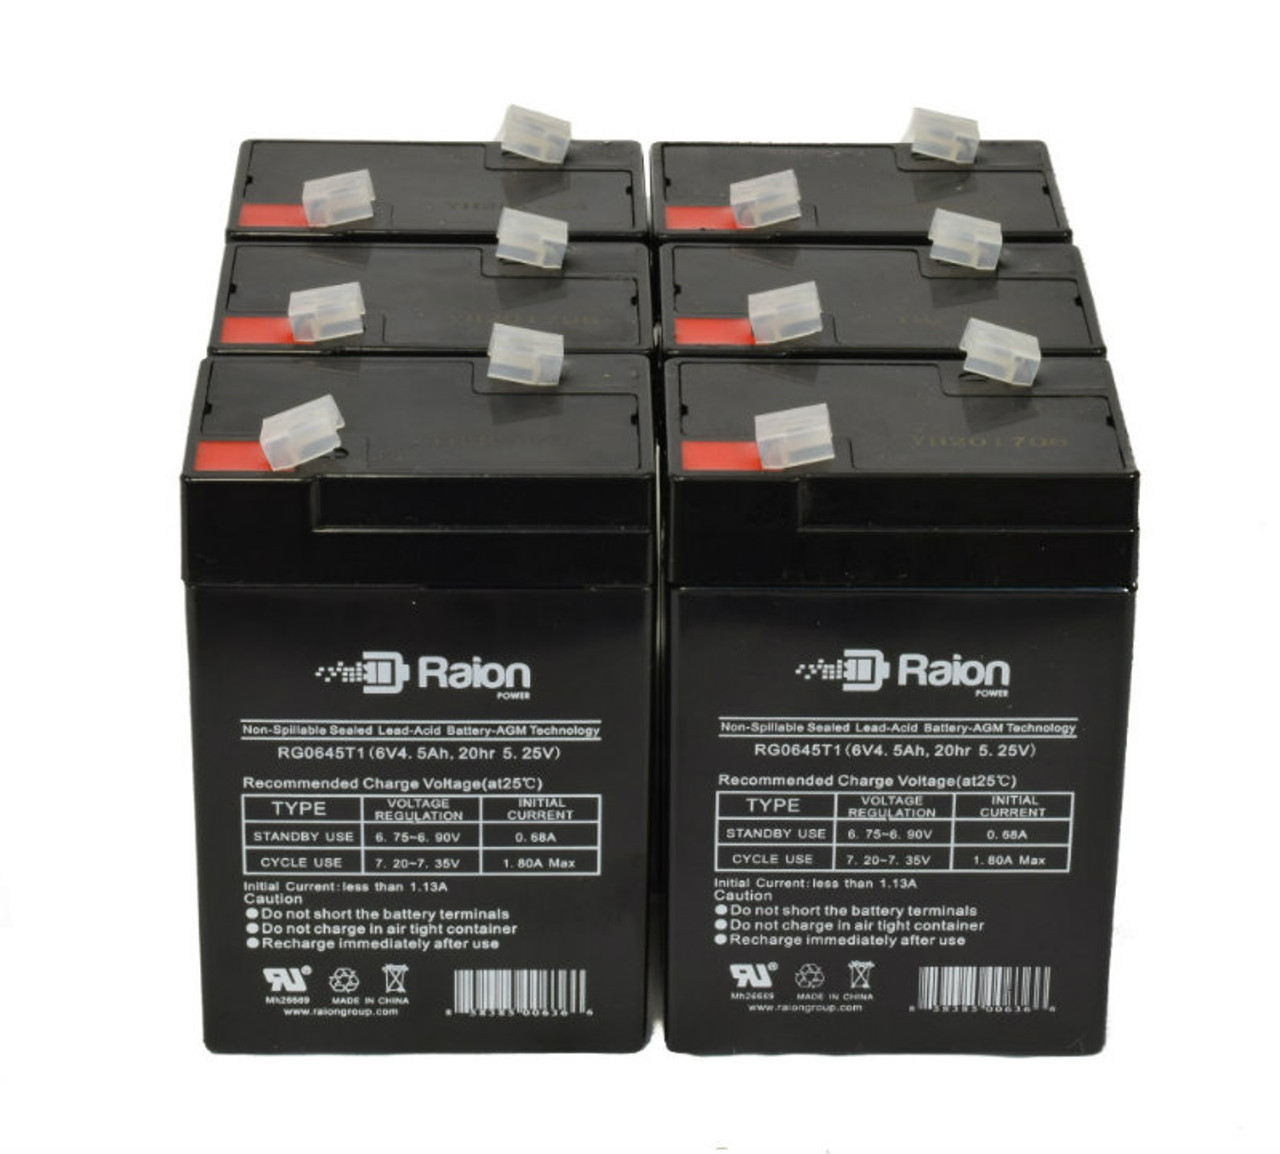 Raion Power 6 Volt 4.5Ah RG0645T1 Replacement Battery for GP GB4.2-6 - 6 Pack